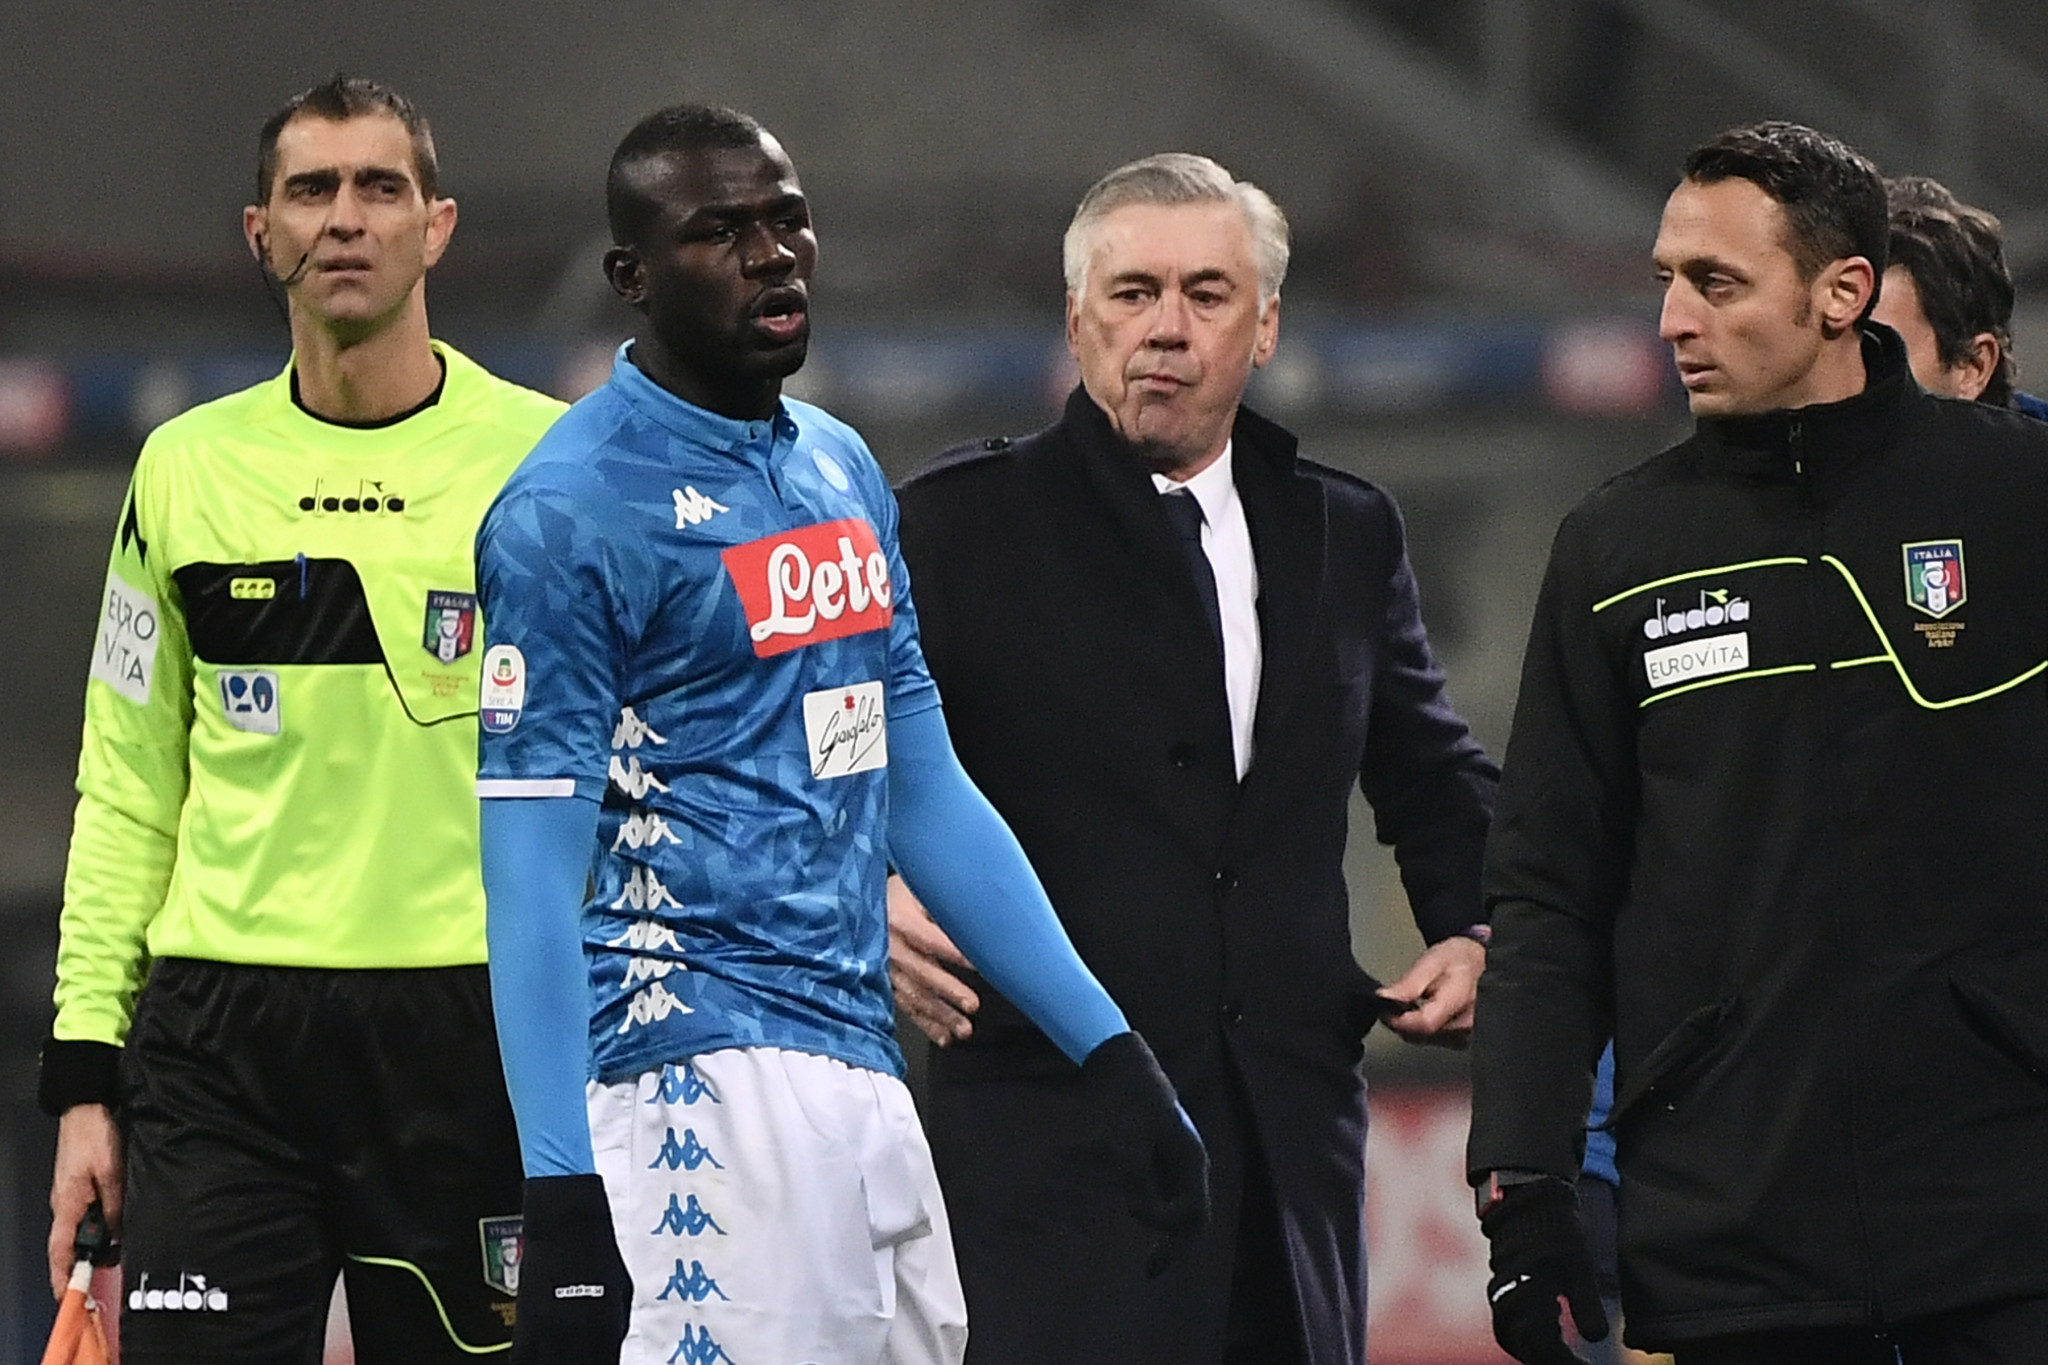 Napoli defender Kalidou Koulibaly of Senegal was sent off during Napoli's clash with Inter Milan, despite allegedly being subject to racist abuse ©Getty Images